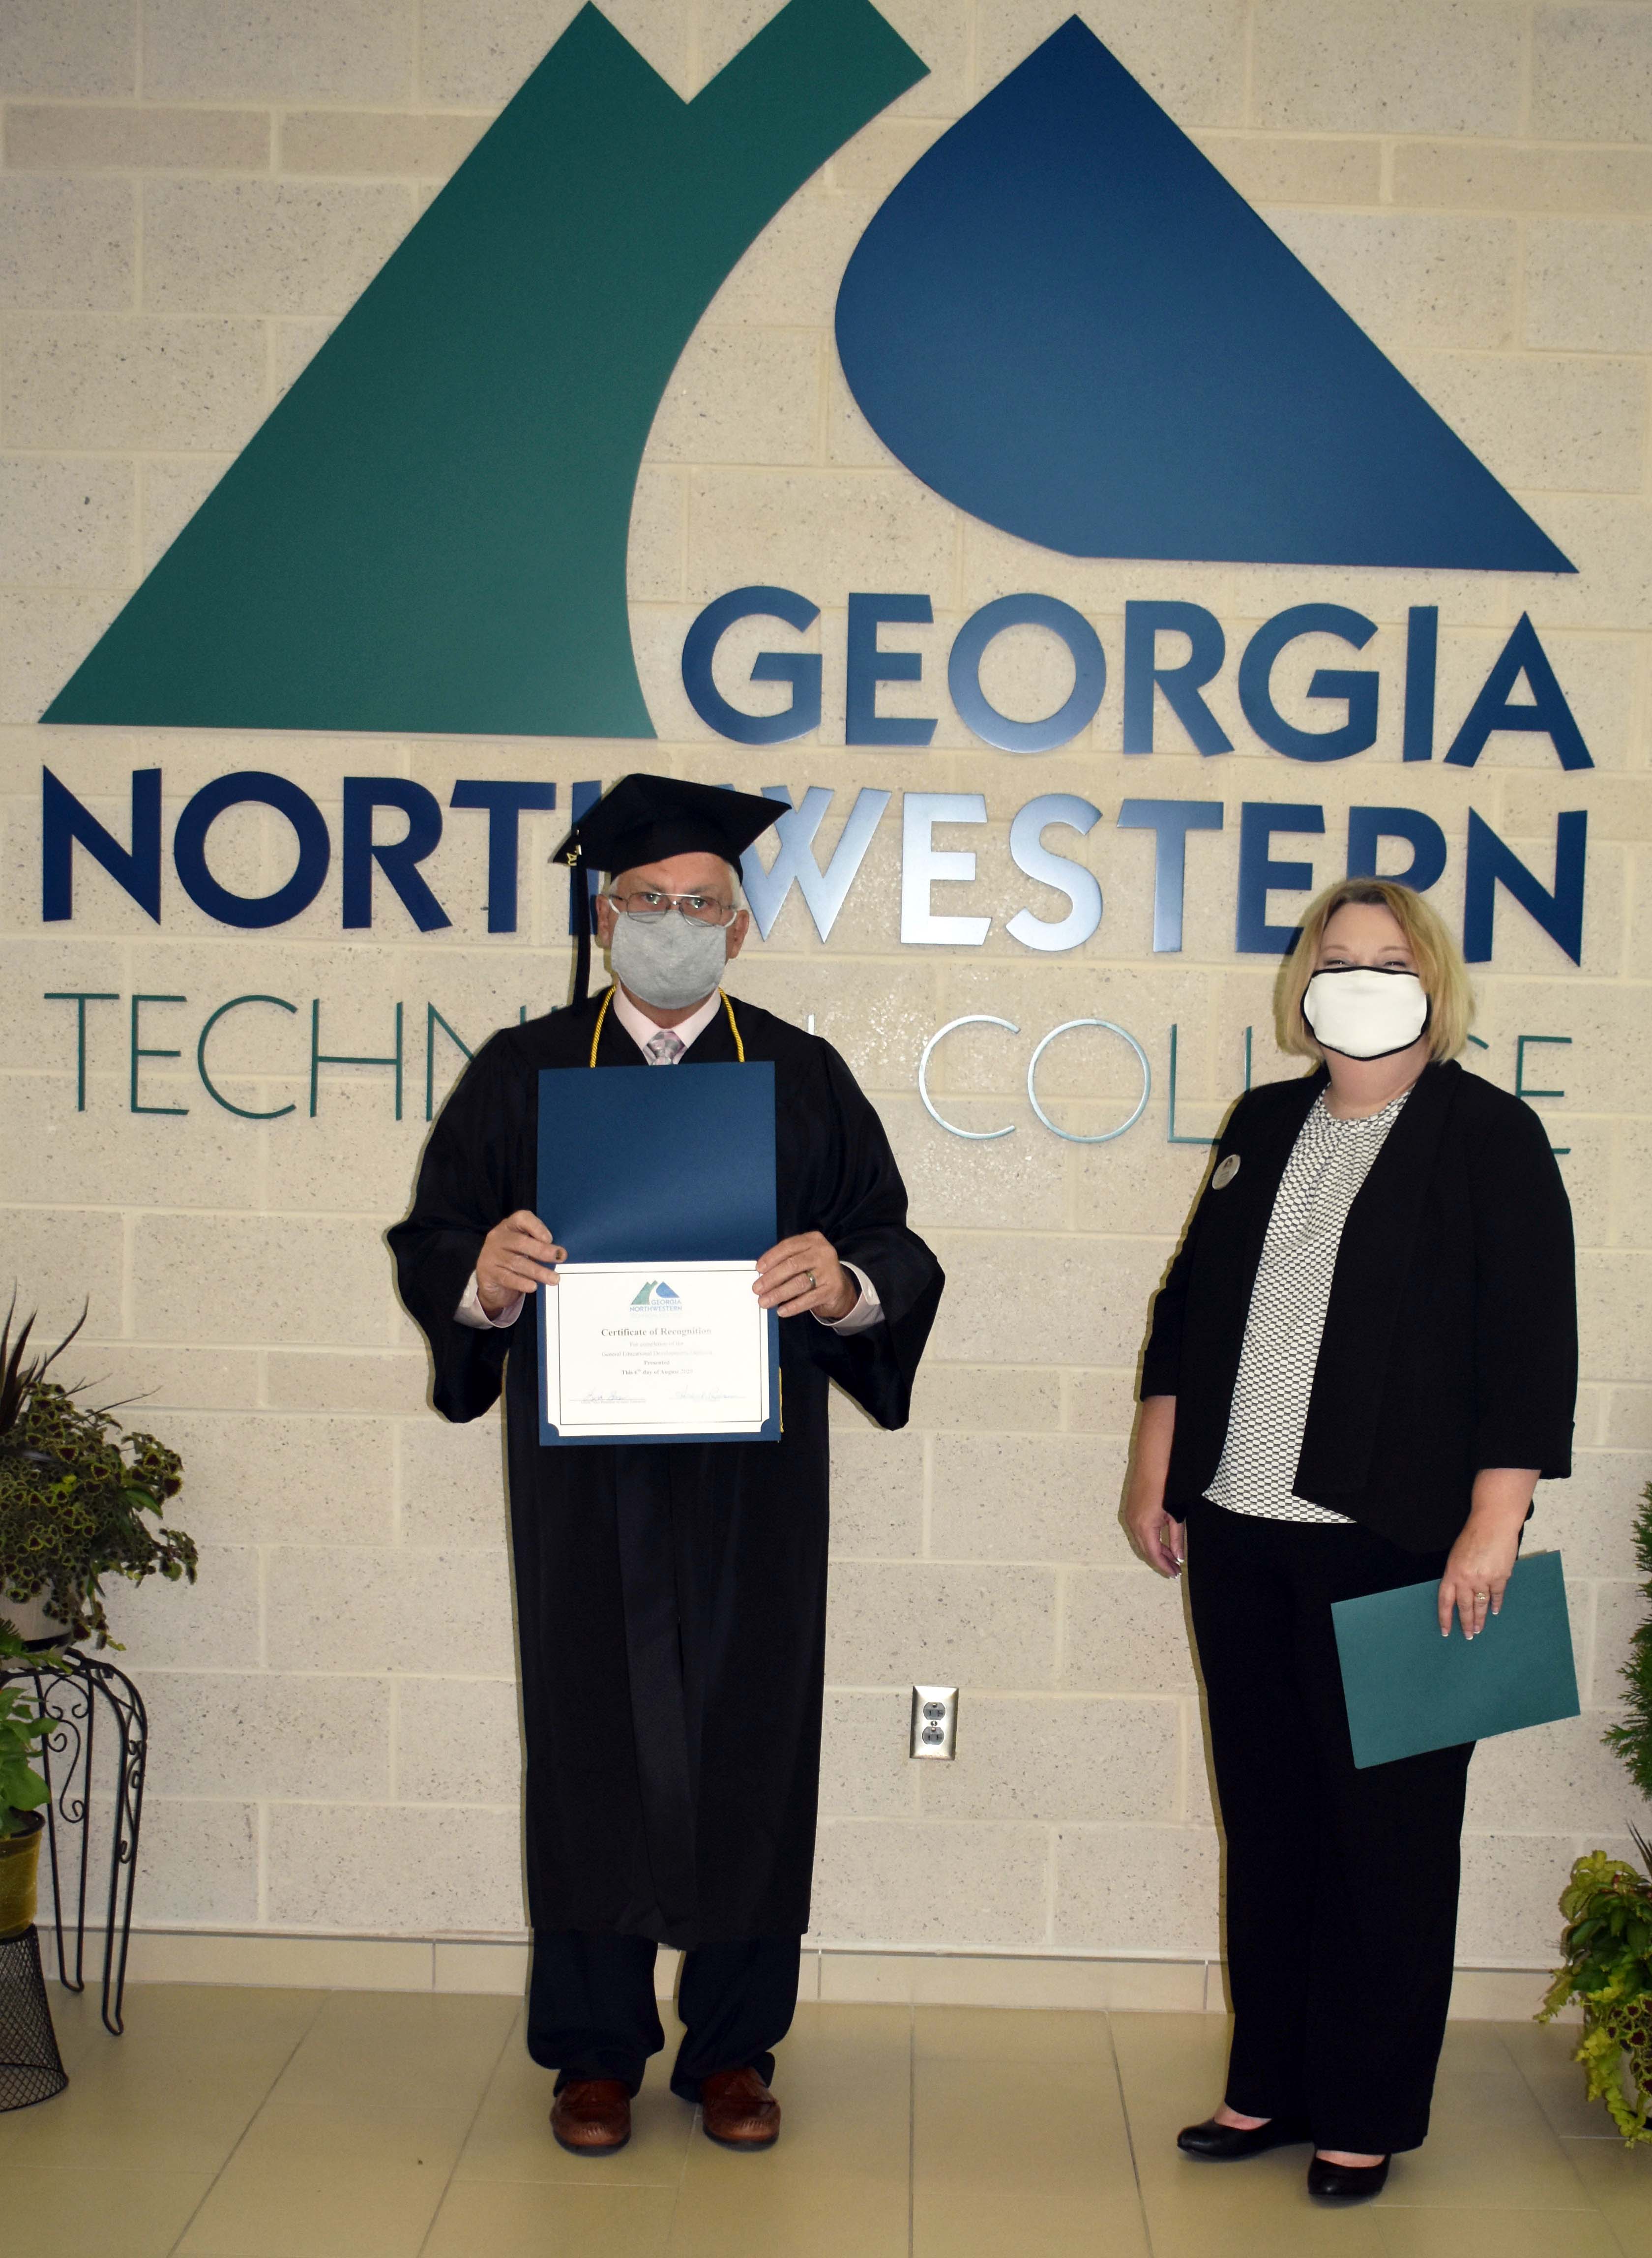 Jim Gunter of Rossville (left), stands with Lisa Shaw, GNTC vice president of Adult Education, during Georgia Northwestern Technical College’s Adult Education graduation celebration at the Catoosa County Campus.